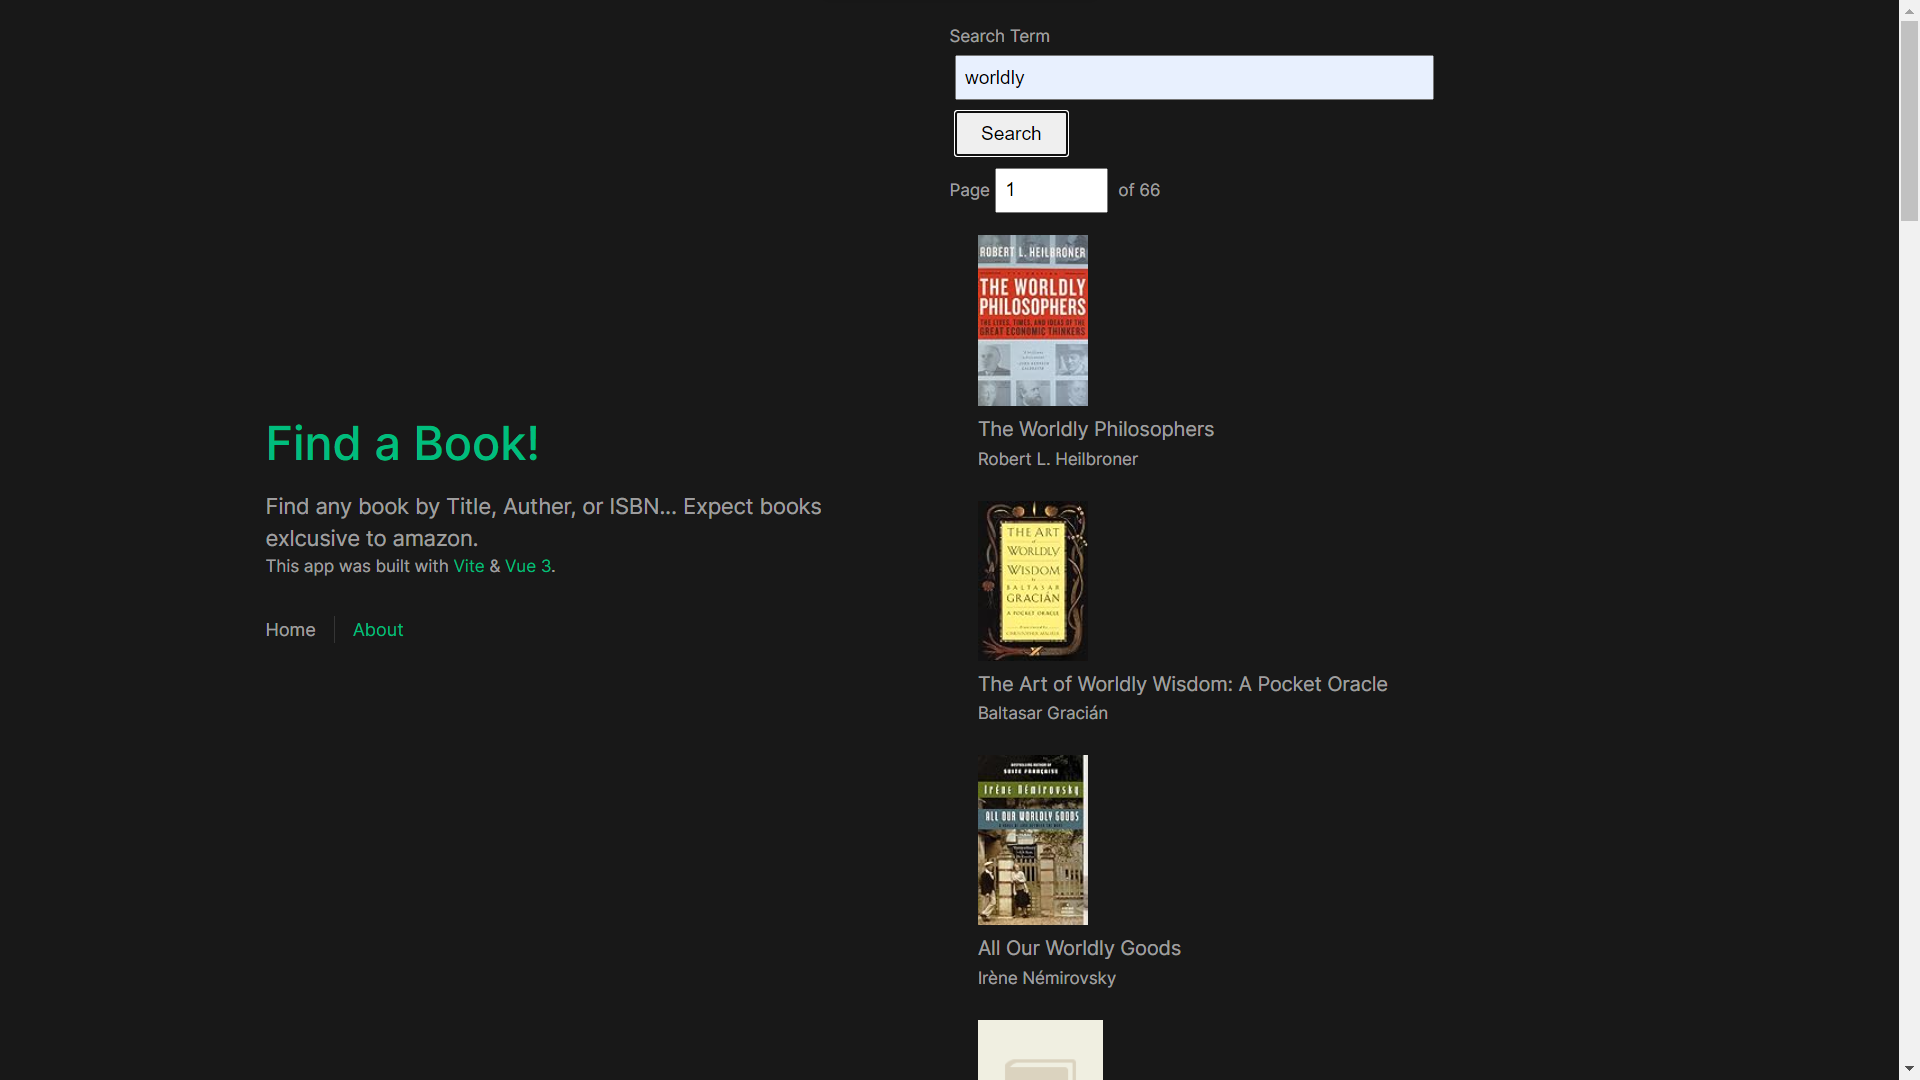  Image of Book Searching App